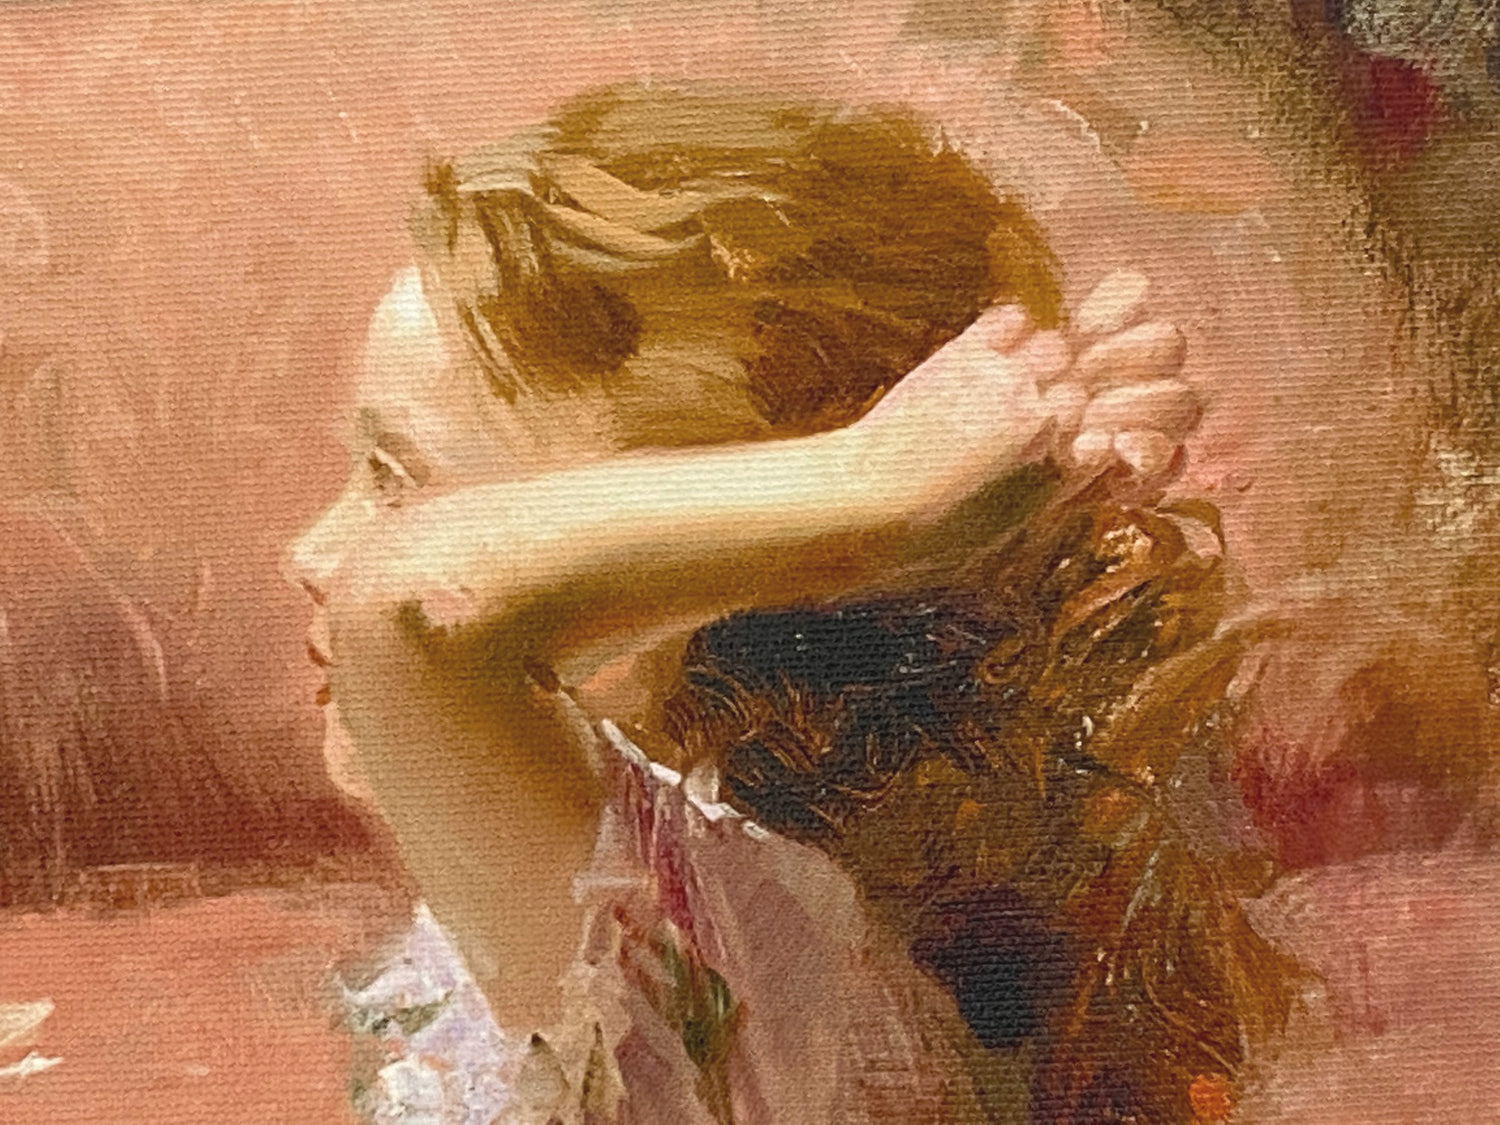 Thinking of You Pino Daeni Canvas Giclée Print Artist Hand Signed and Numbered